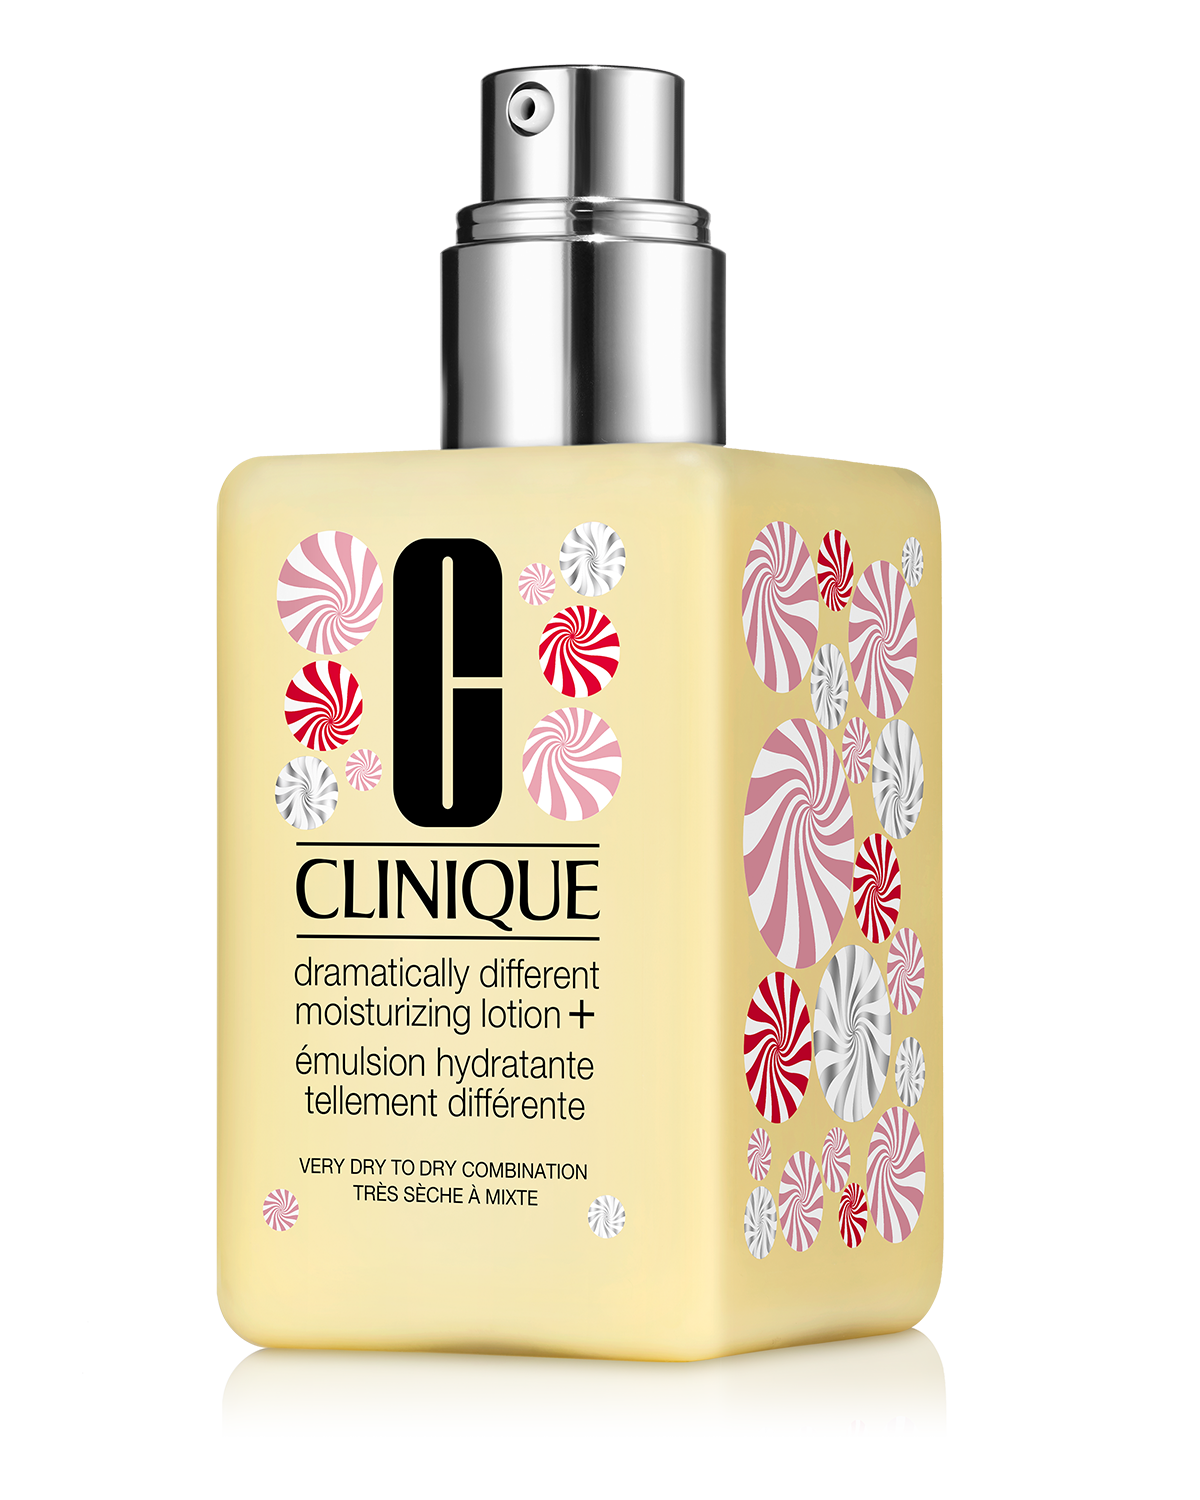 Decorated Jumbo Dramatically Different Moisturizing Lotion+ Clinique | Austria